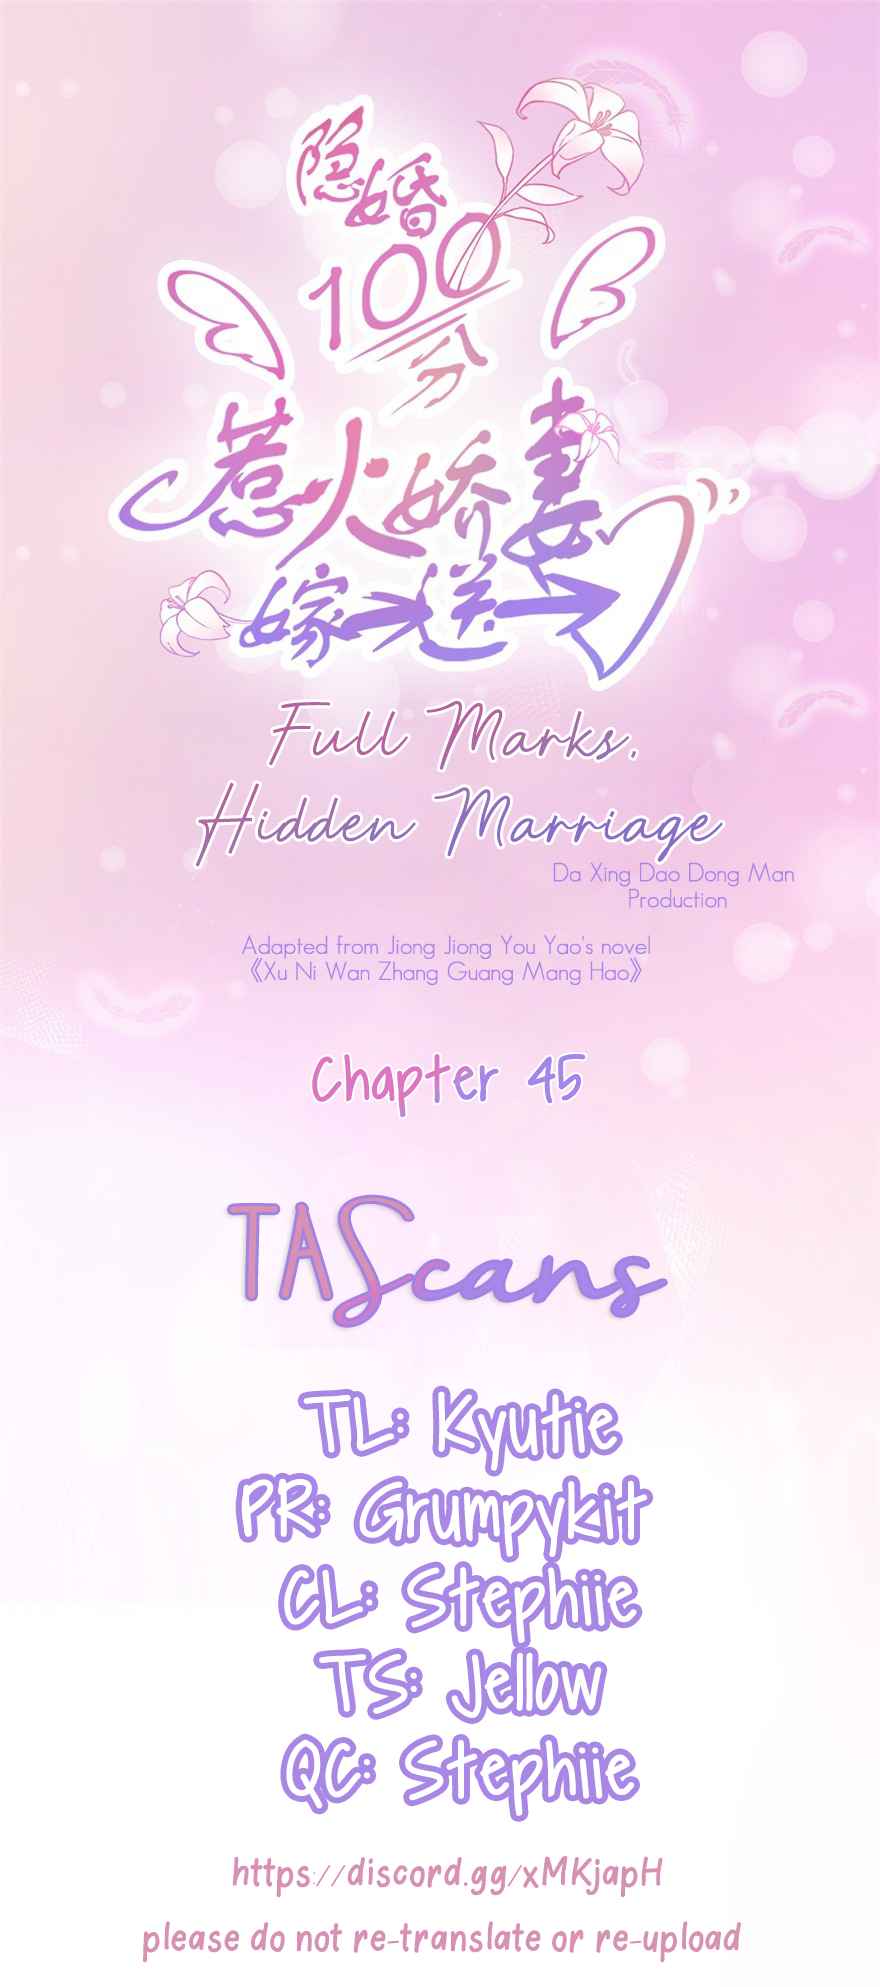 Full Marks, Hidden Marriage Ch. 45 Miss Ning, shall we try it out?